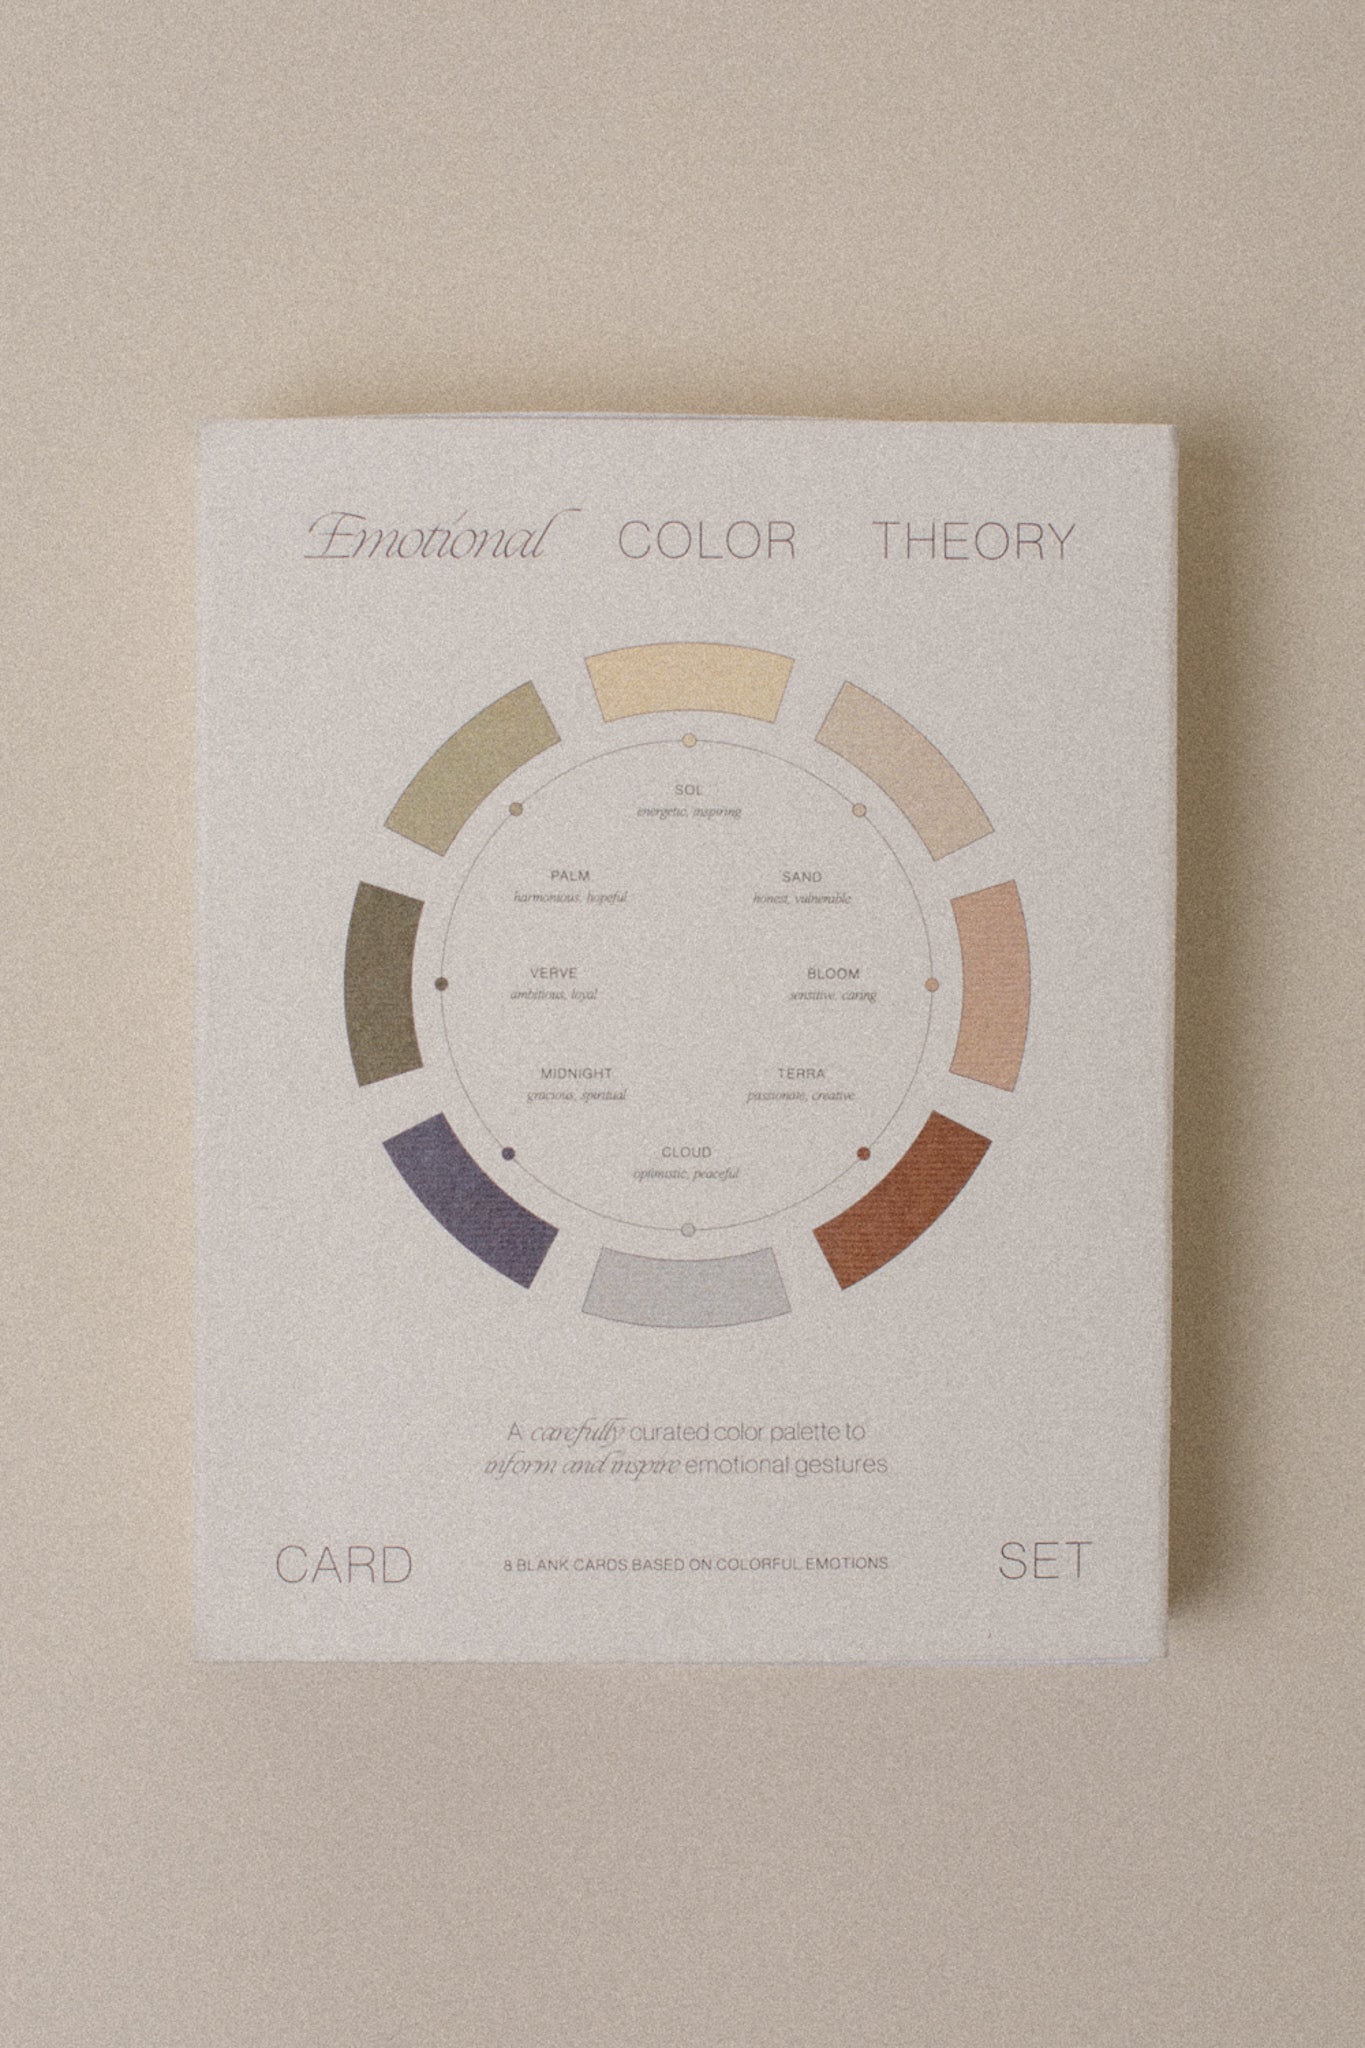 Emotional Color Theory Card Set